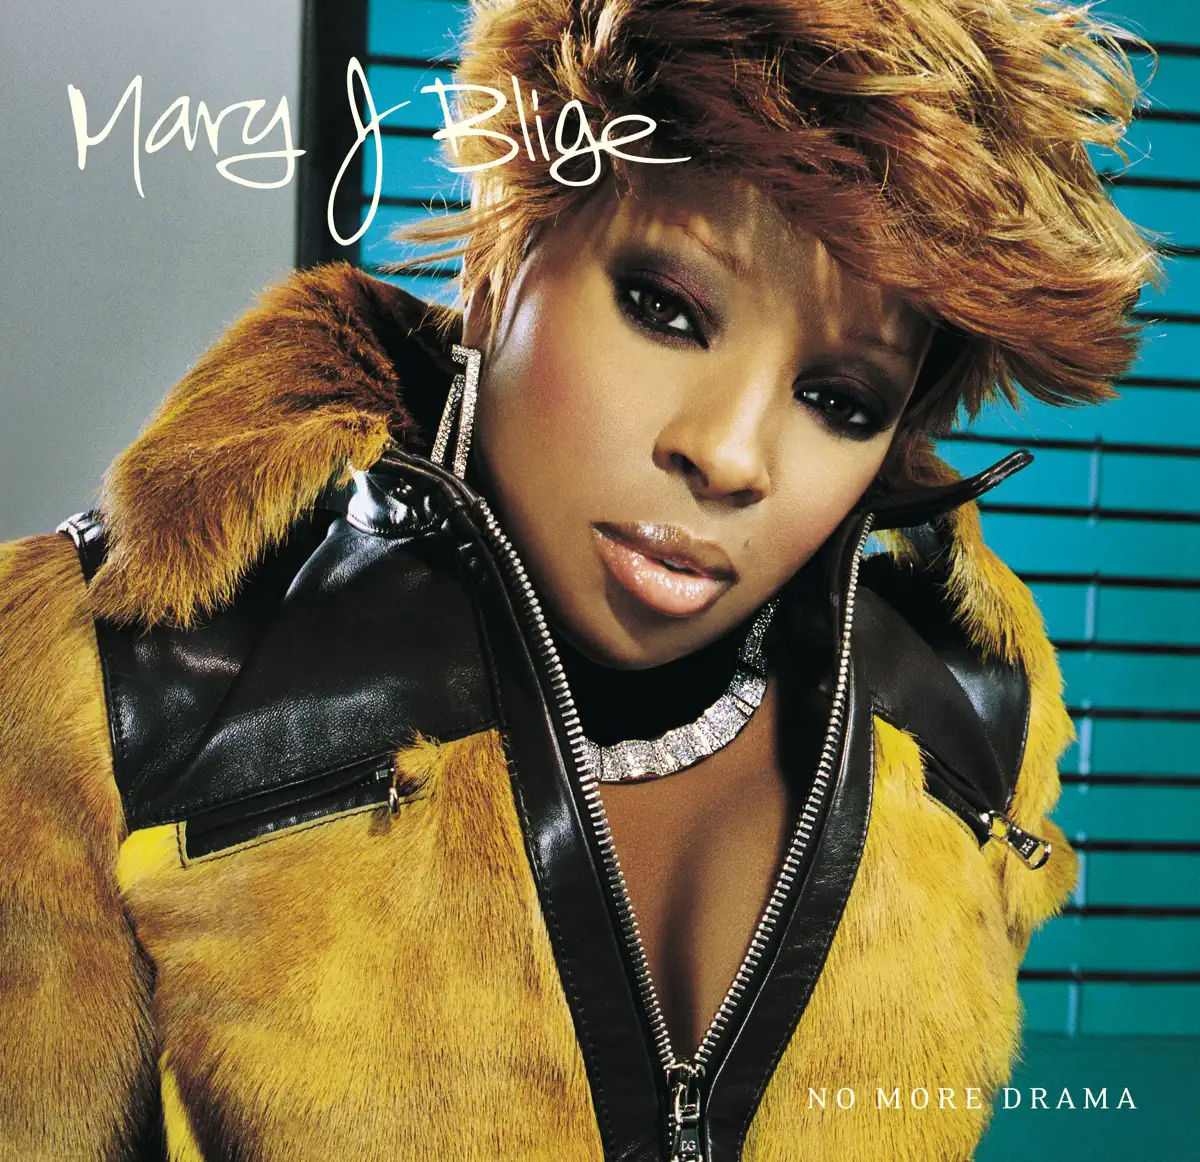 Mary J. Blige - No More Drama (Version 1) (2001) [iTunes Plus AAC M4A]-新房子